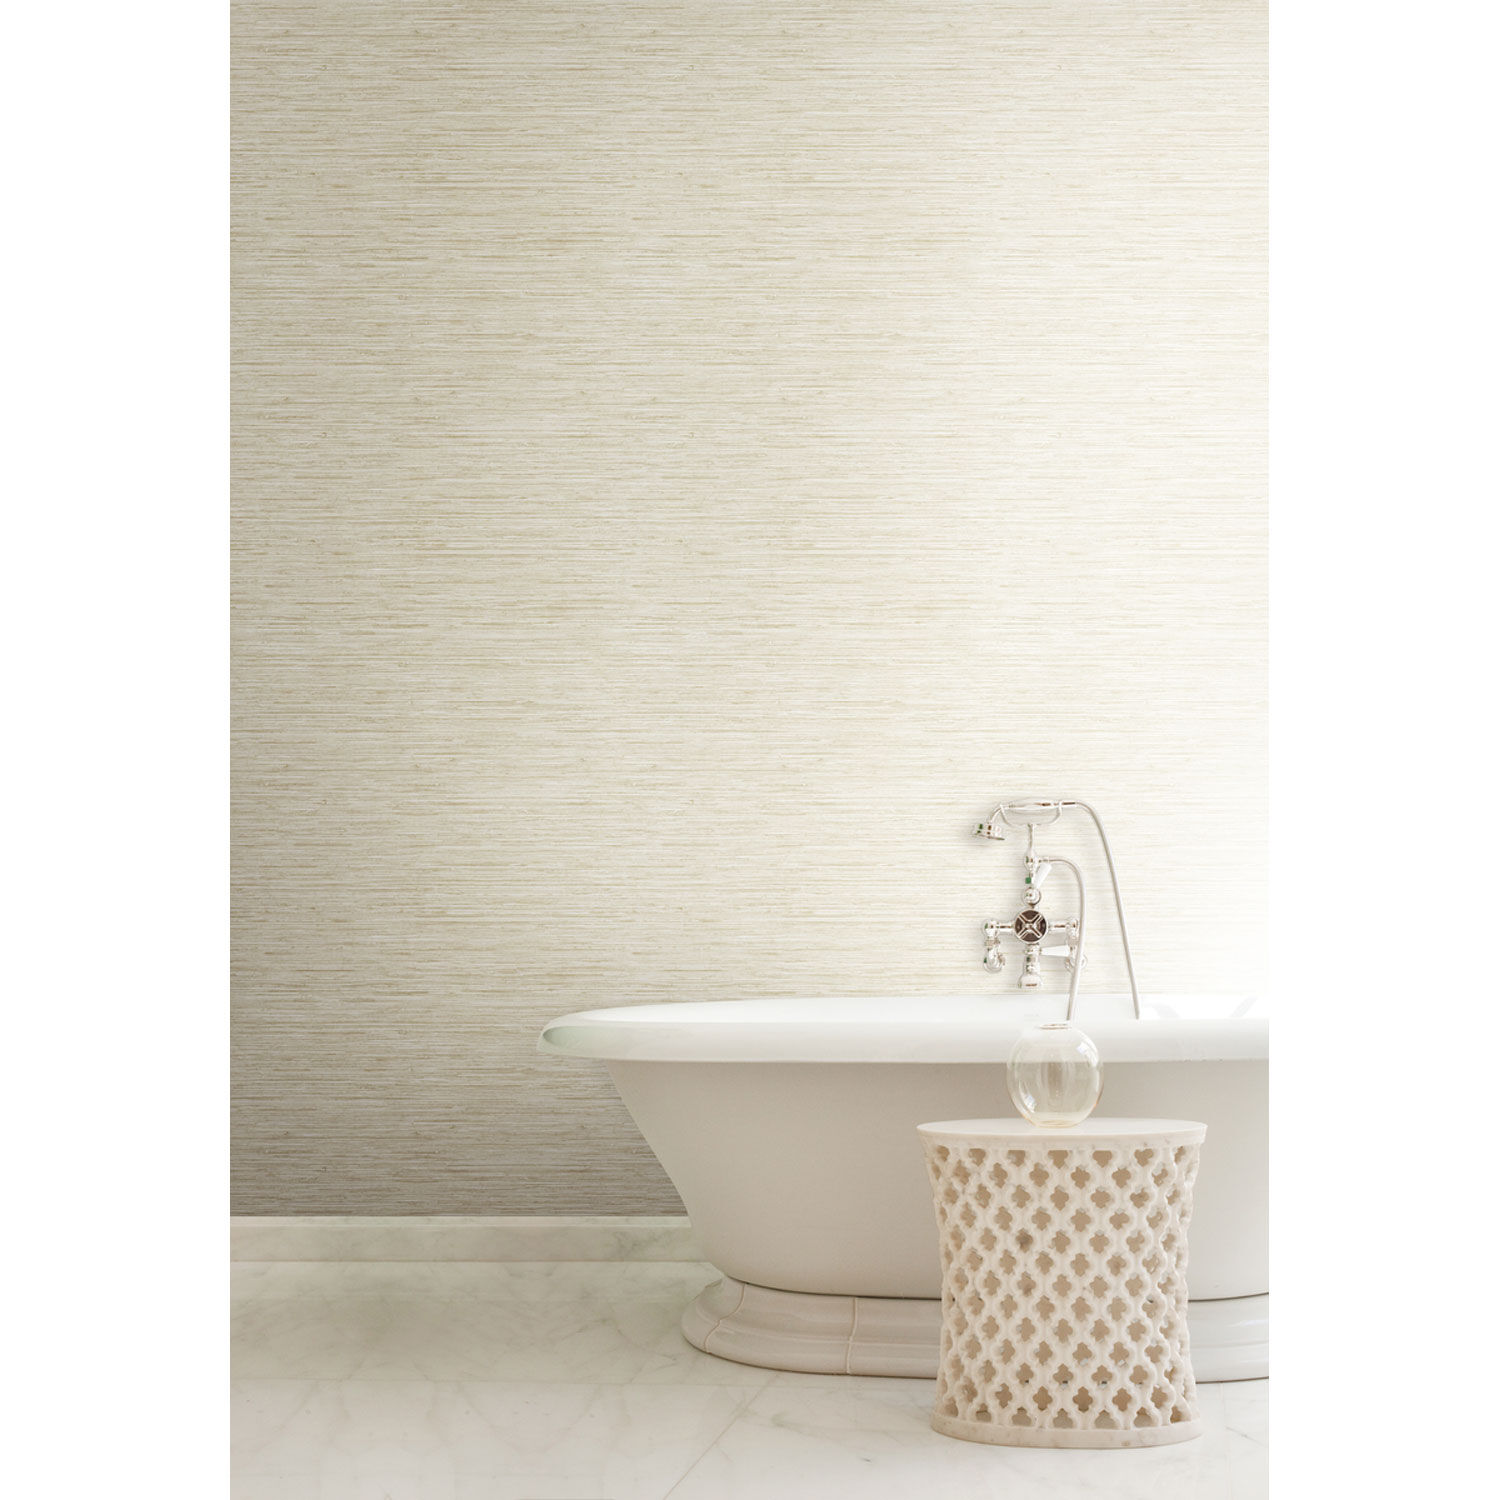 FuLWth Cream White Contact Paper White Grasscloth India  Ubuy